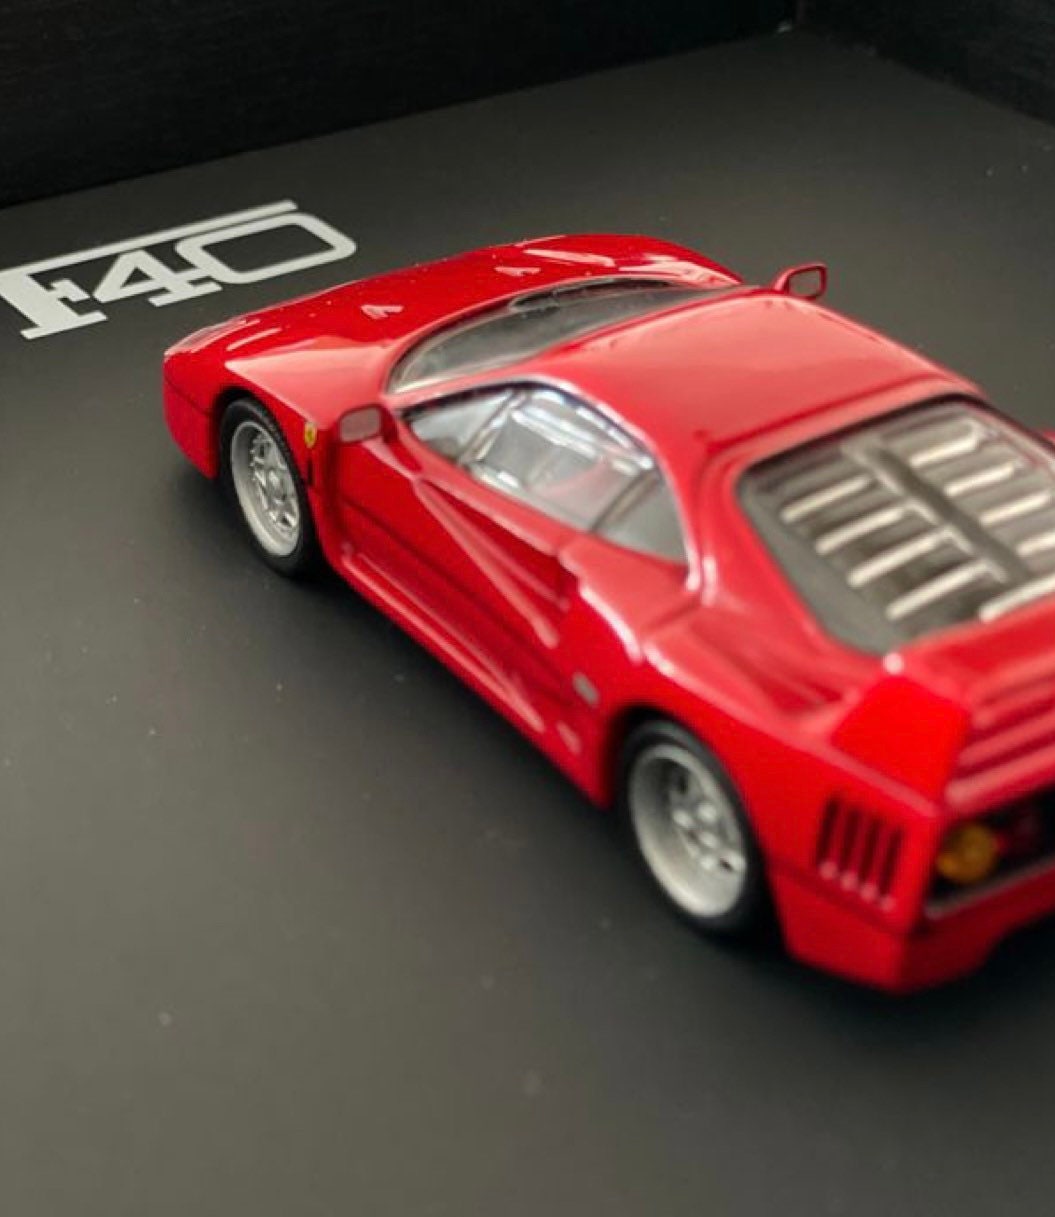 1/43 scale Hot Wheels Ferrari F40, This is the only F40 I h…